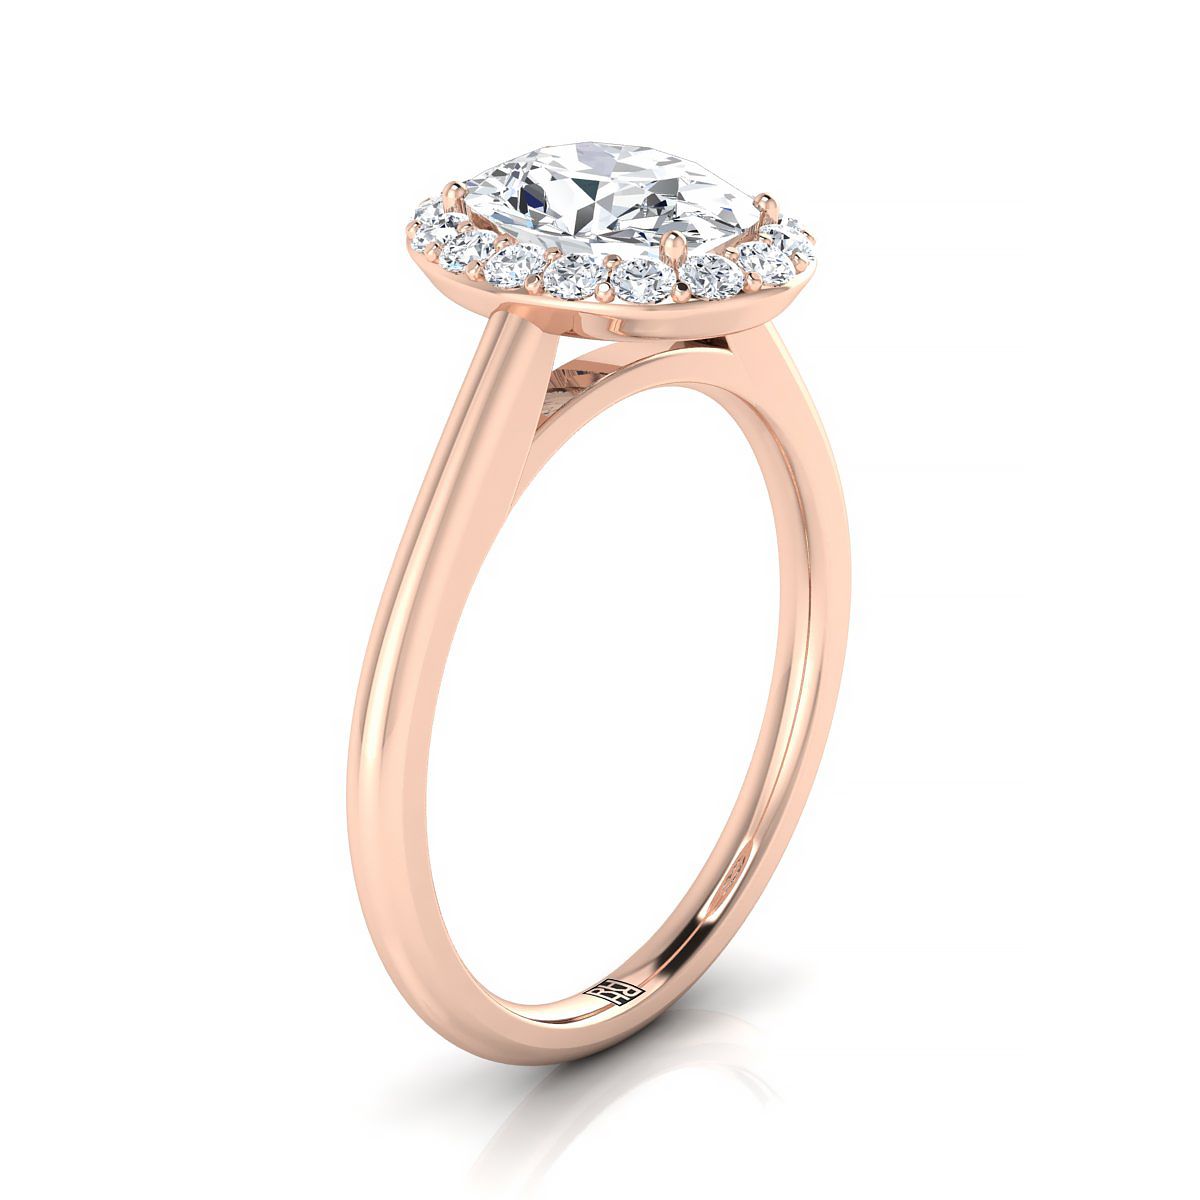 14K Rose Gold Oval Morganite Shared Prong Diamond Halo Engagement Ring -1/5ctw